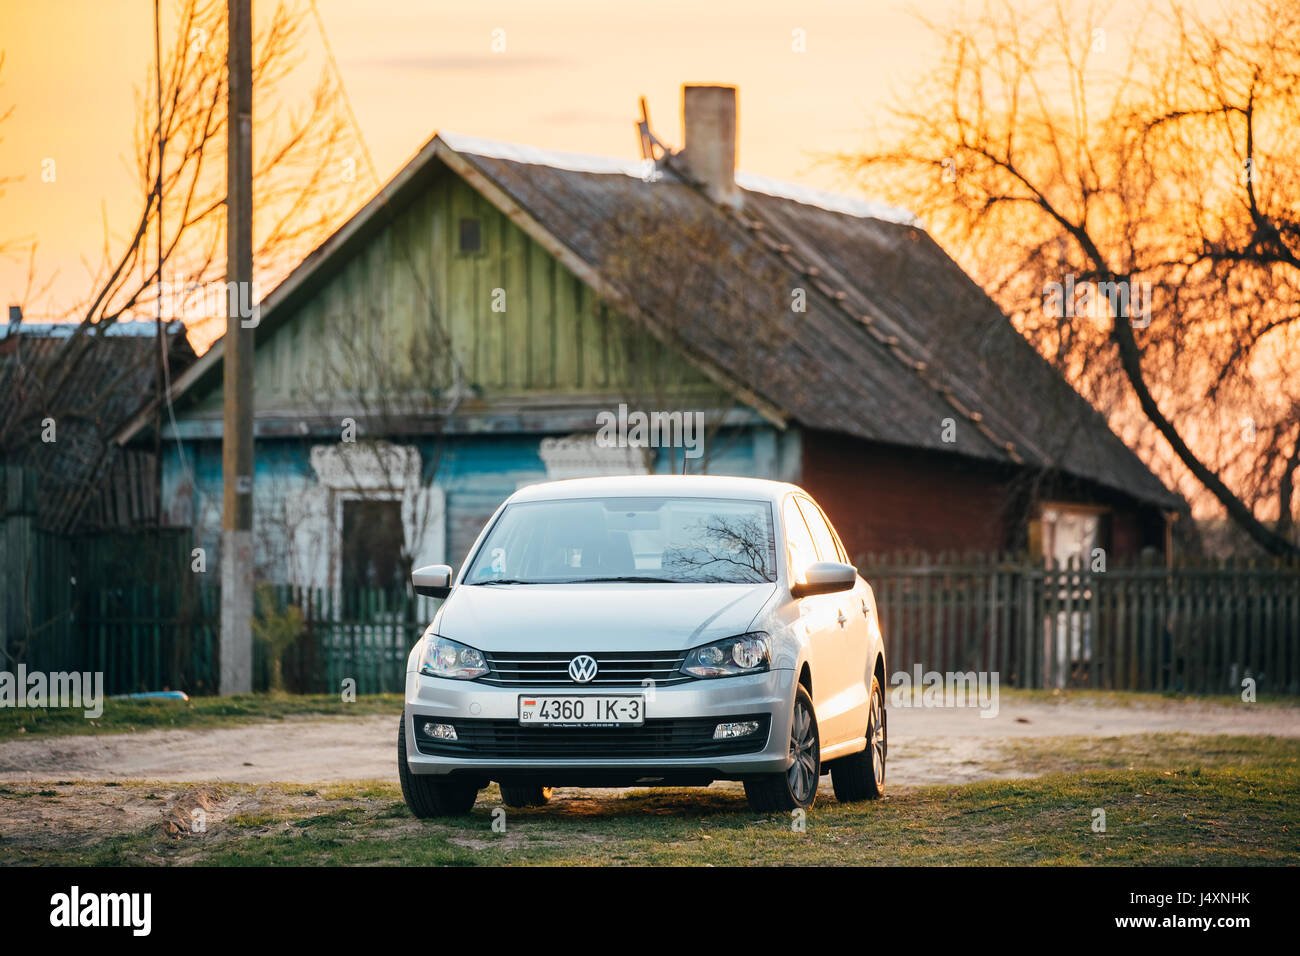 Gomel, Belarus - April 9, 2017: Volkswagen Polo Car Parking On Country Road On A Background Of Traditional Old Wooden Village House In Sunny Evening Stock Photo